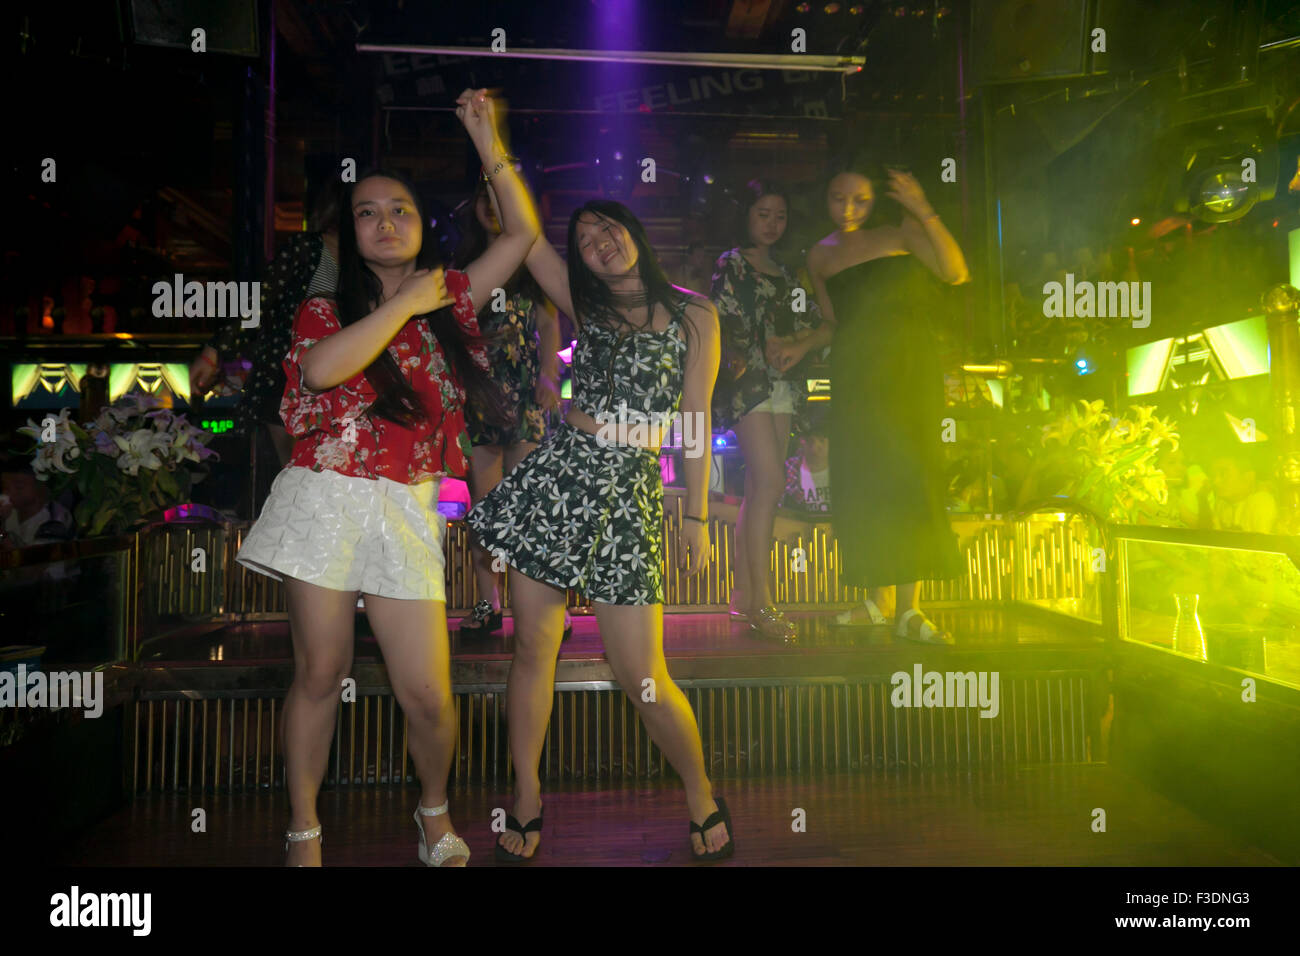 Revellers dancing to techno or electronic music on an elevated stage at a typical modern club in China. Stock Photo